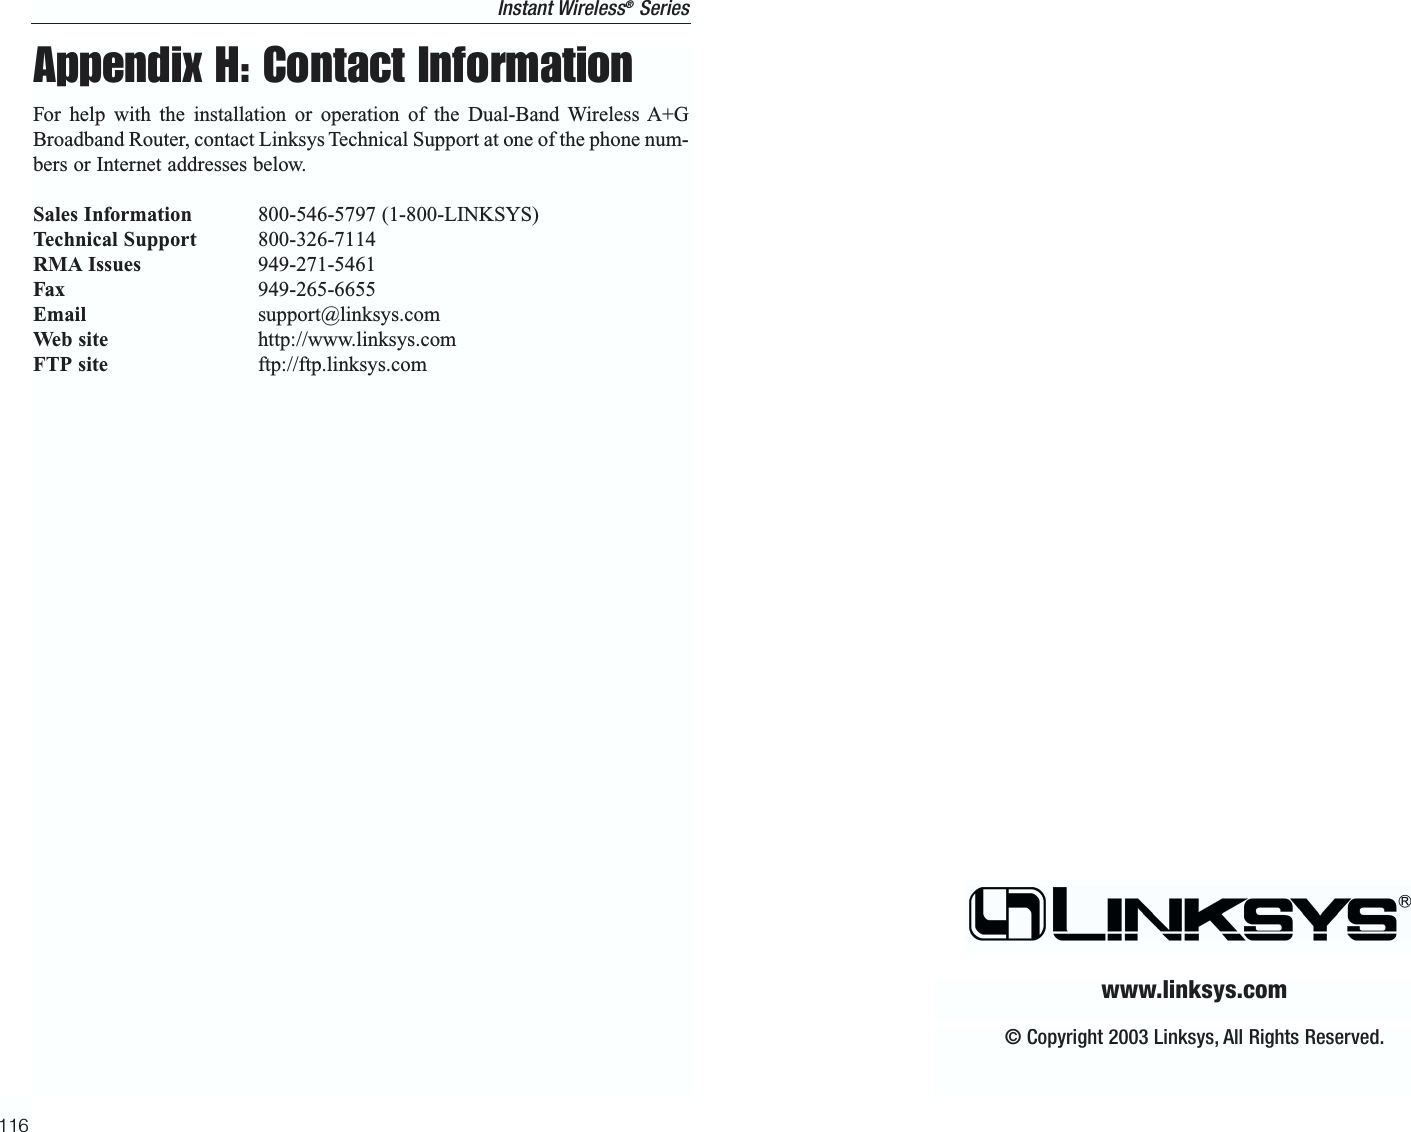 Appendix H: Contact InformationFor help with the installation or operation of the Dual-Band Wireless A+GBroadband Router, contact Linksys Technical Support at one of the phone num-bers or Internet addresses below.Sales Information 800-546-5797 (1-800-LINKSYS)Technical Support 800-326-7114RMA Issues 949-271-5461Fax 949-265-6655Email support@linksys.comWeb site http://www.linksys.comFTP site ftp://ftp.linksys.com116© Copyright 2003 Linksys, All Rights Reserved.www.linksys.comInstant Wireless®Series